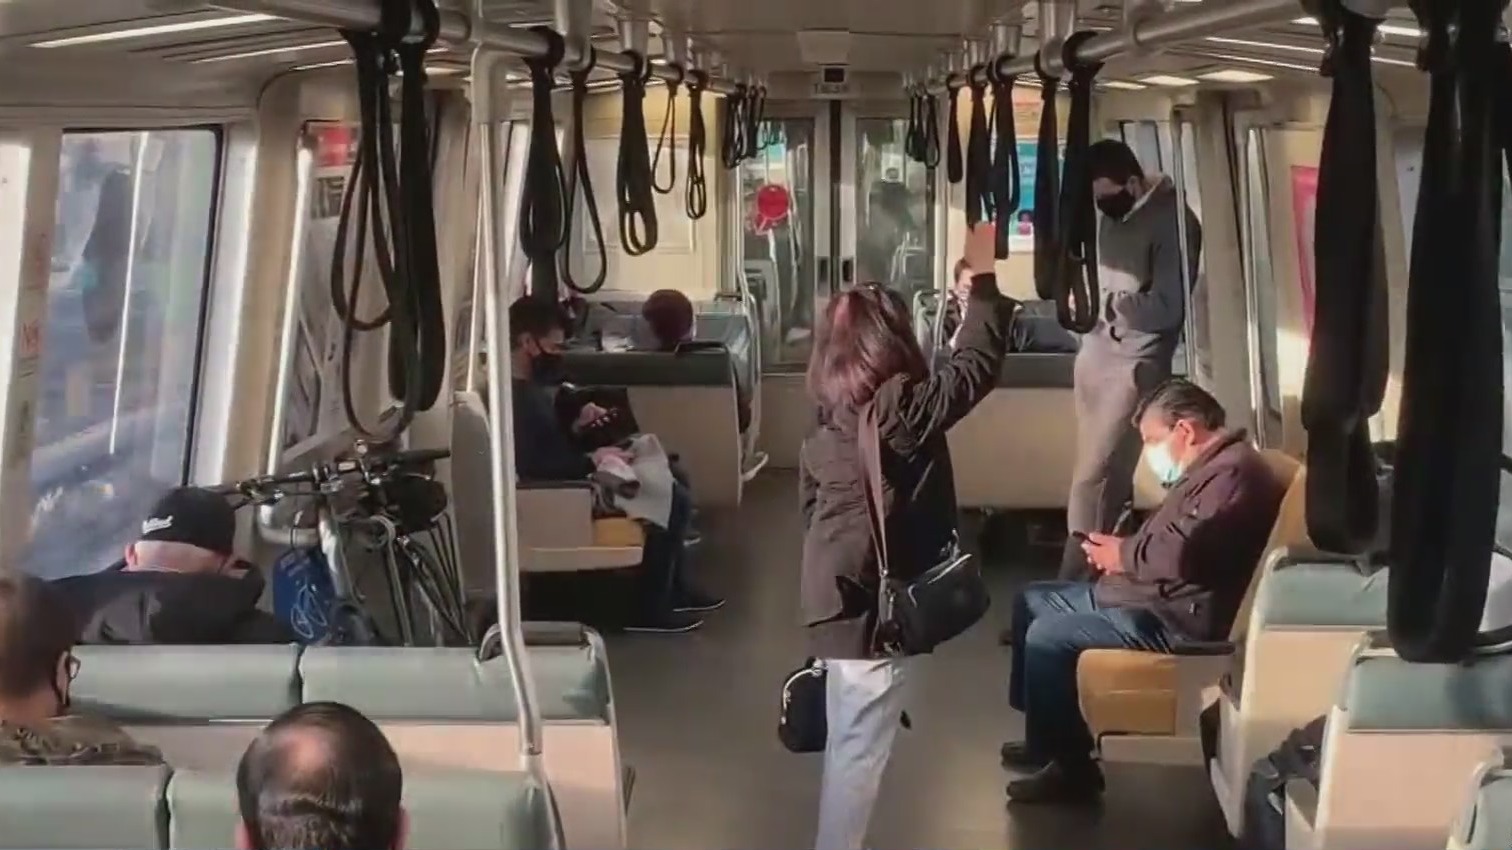 Inside a BART train during the COVID-19 pandemic, November 23, 2021. (CBS)